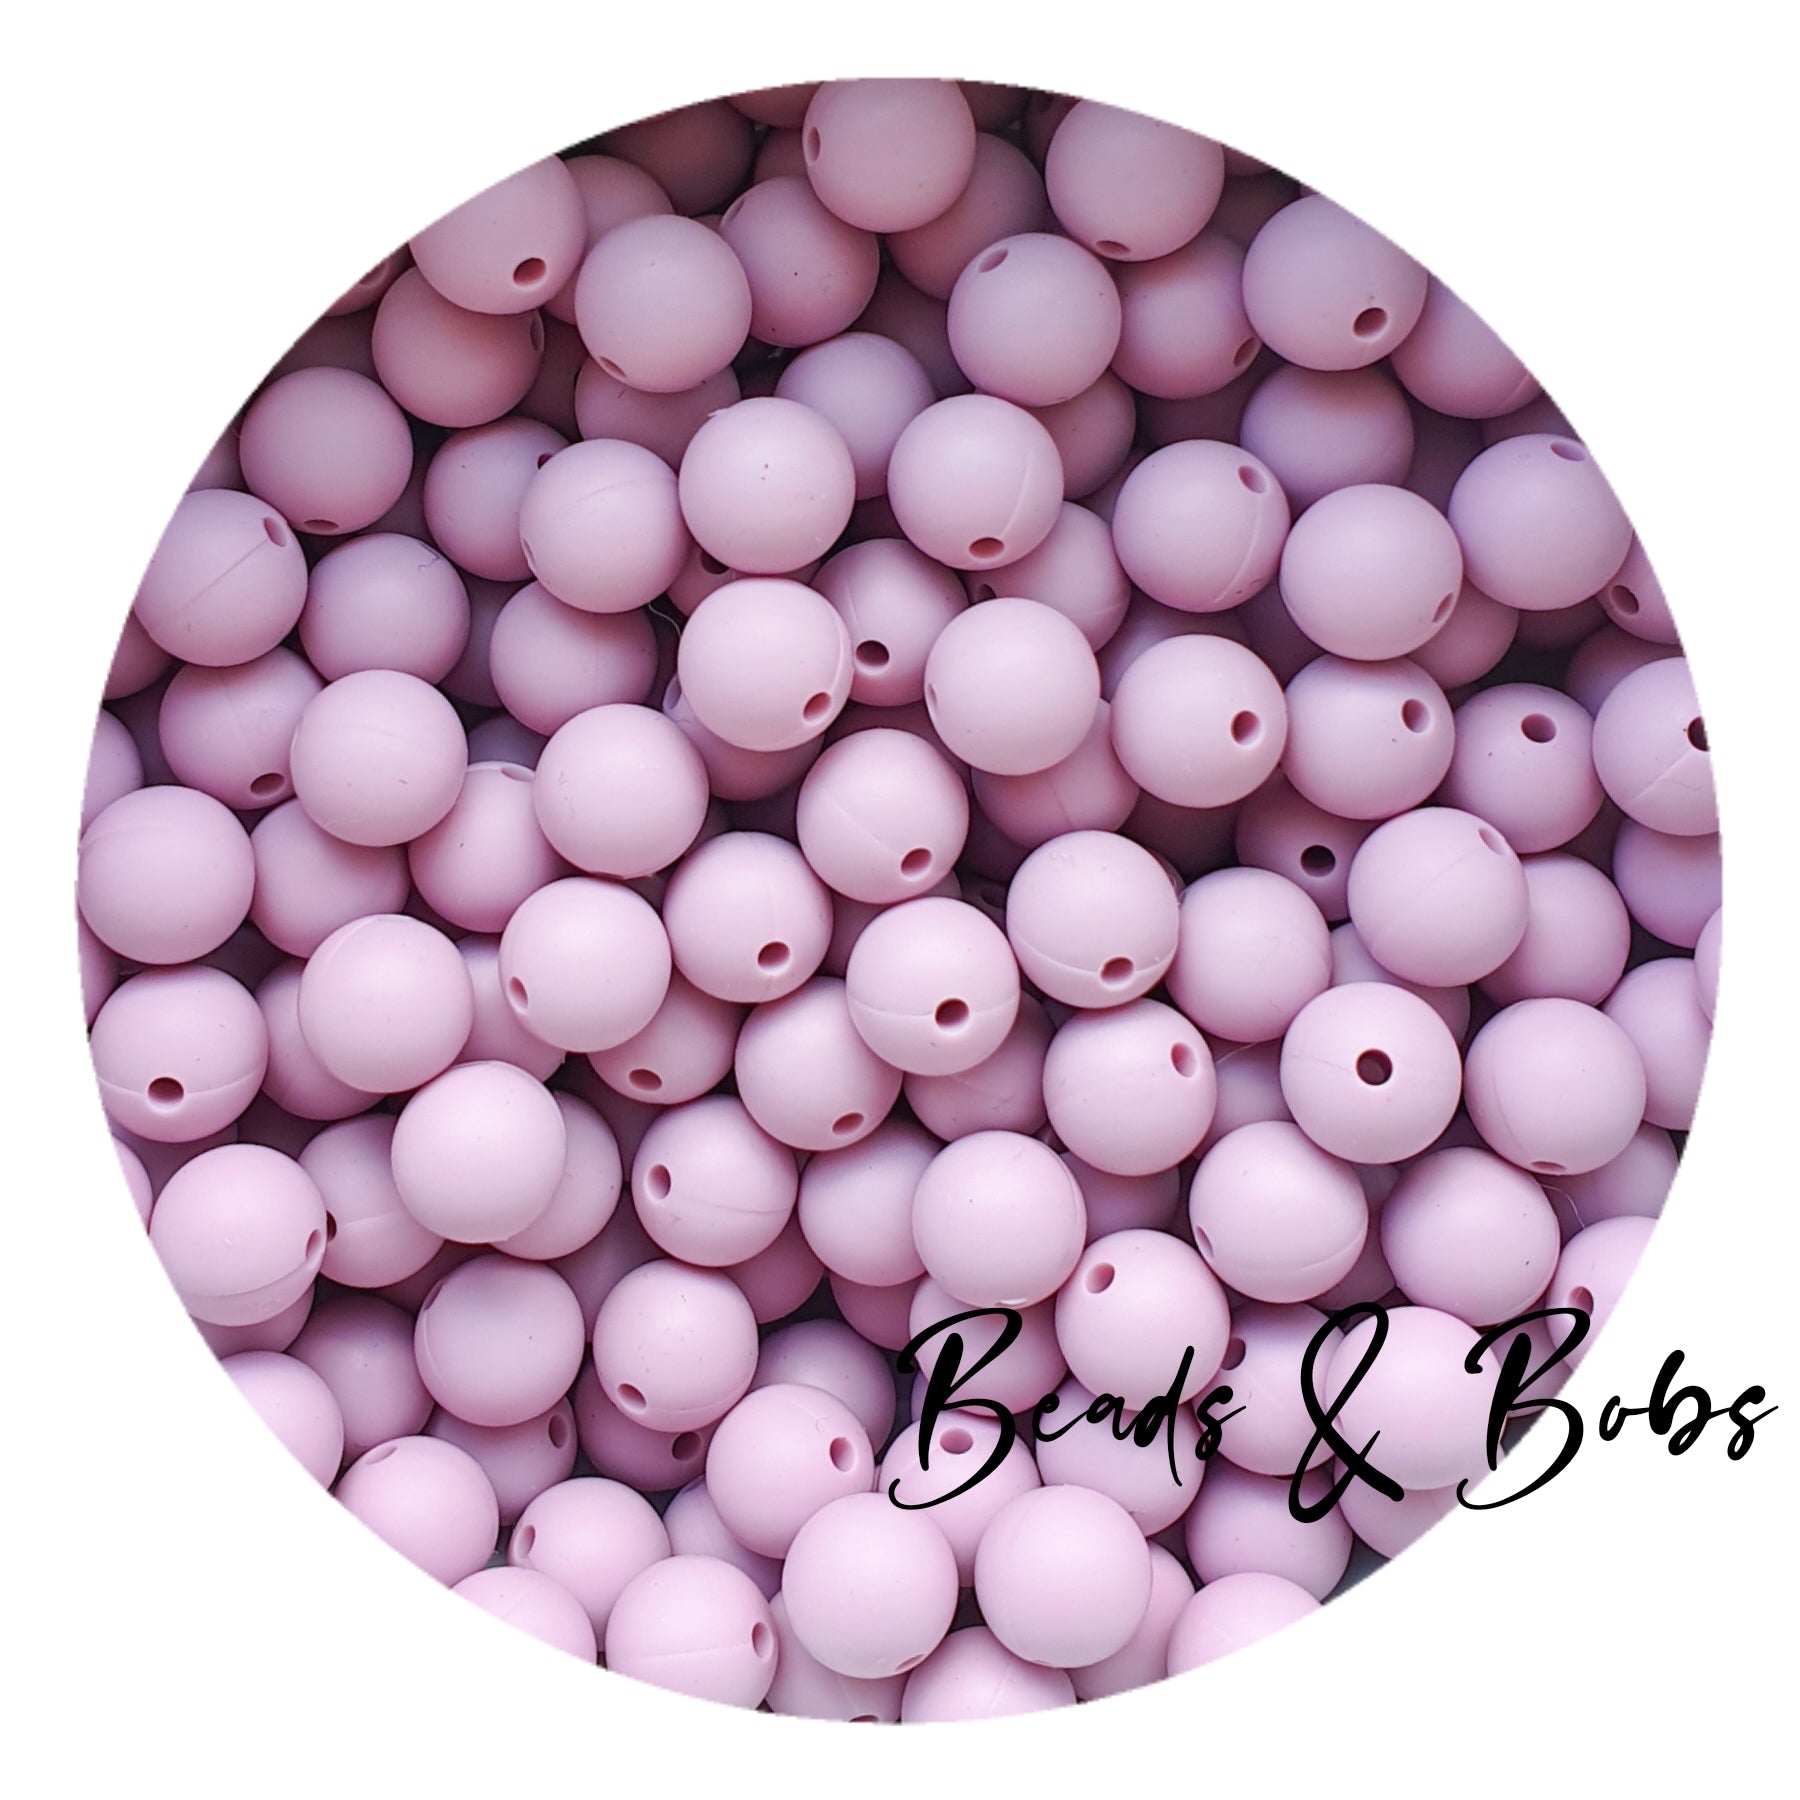 Round 9mm - Silicone Beads